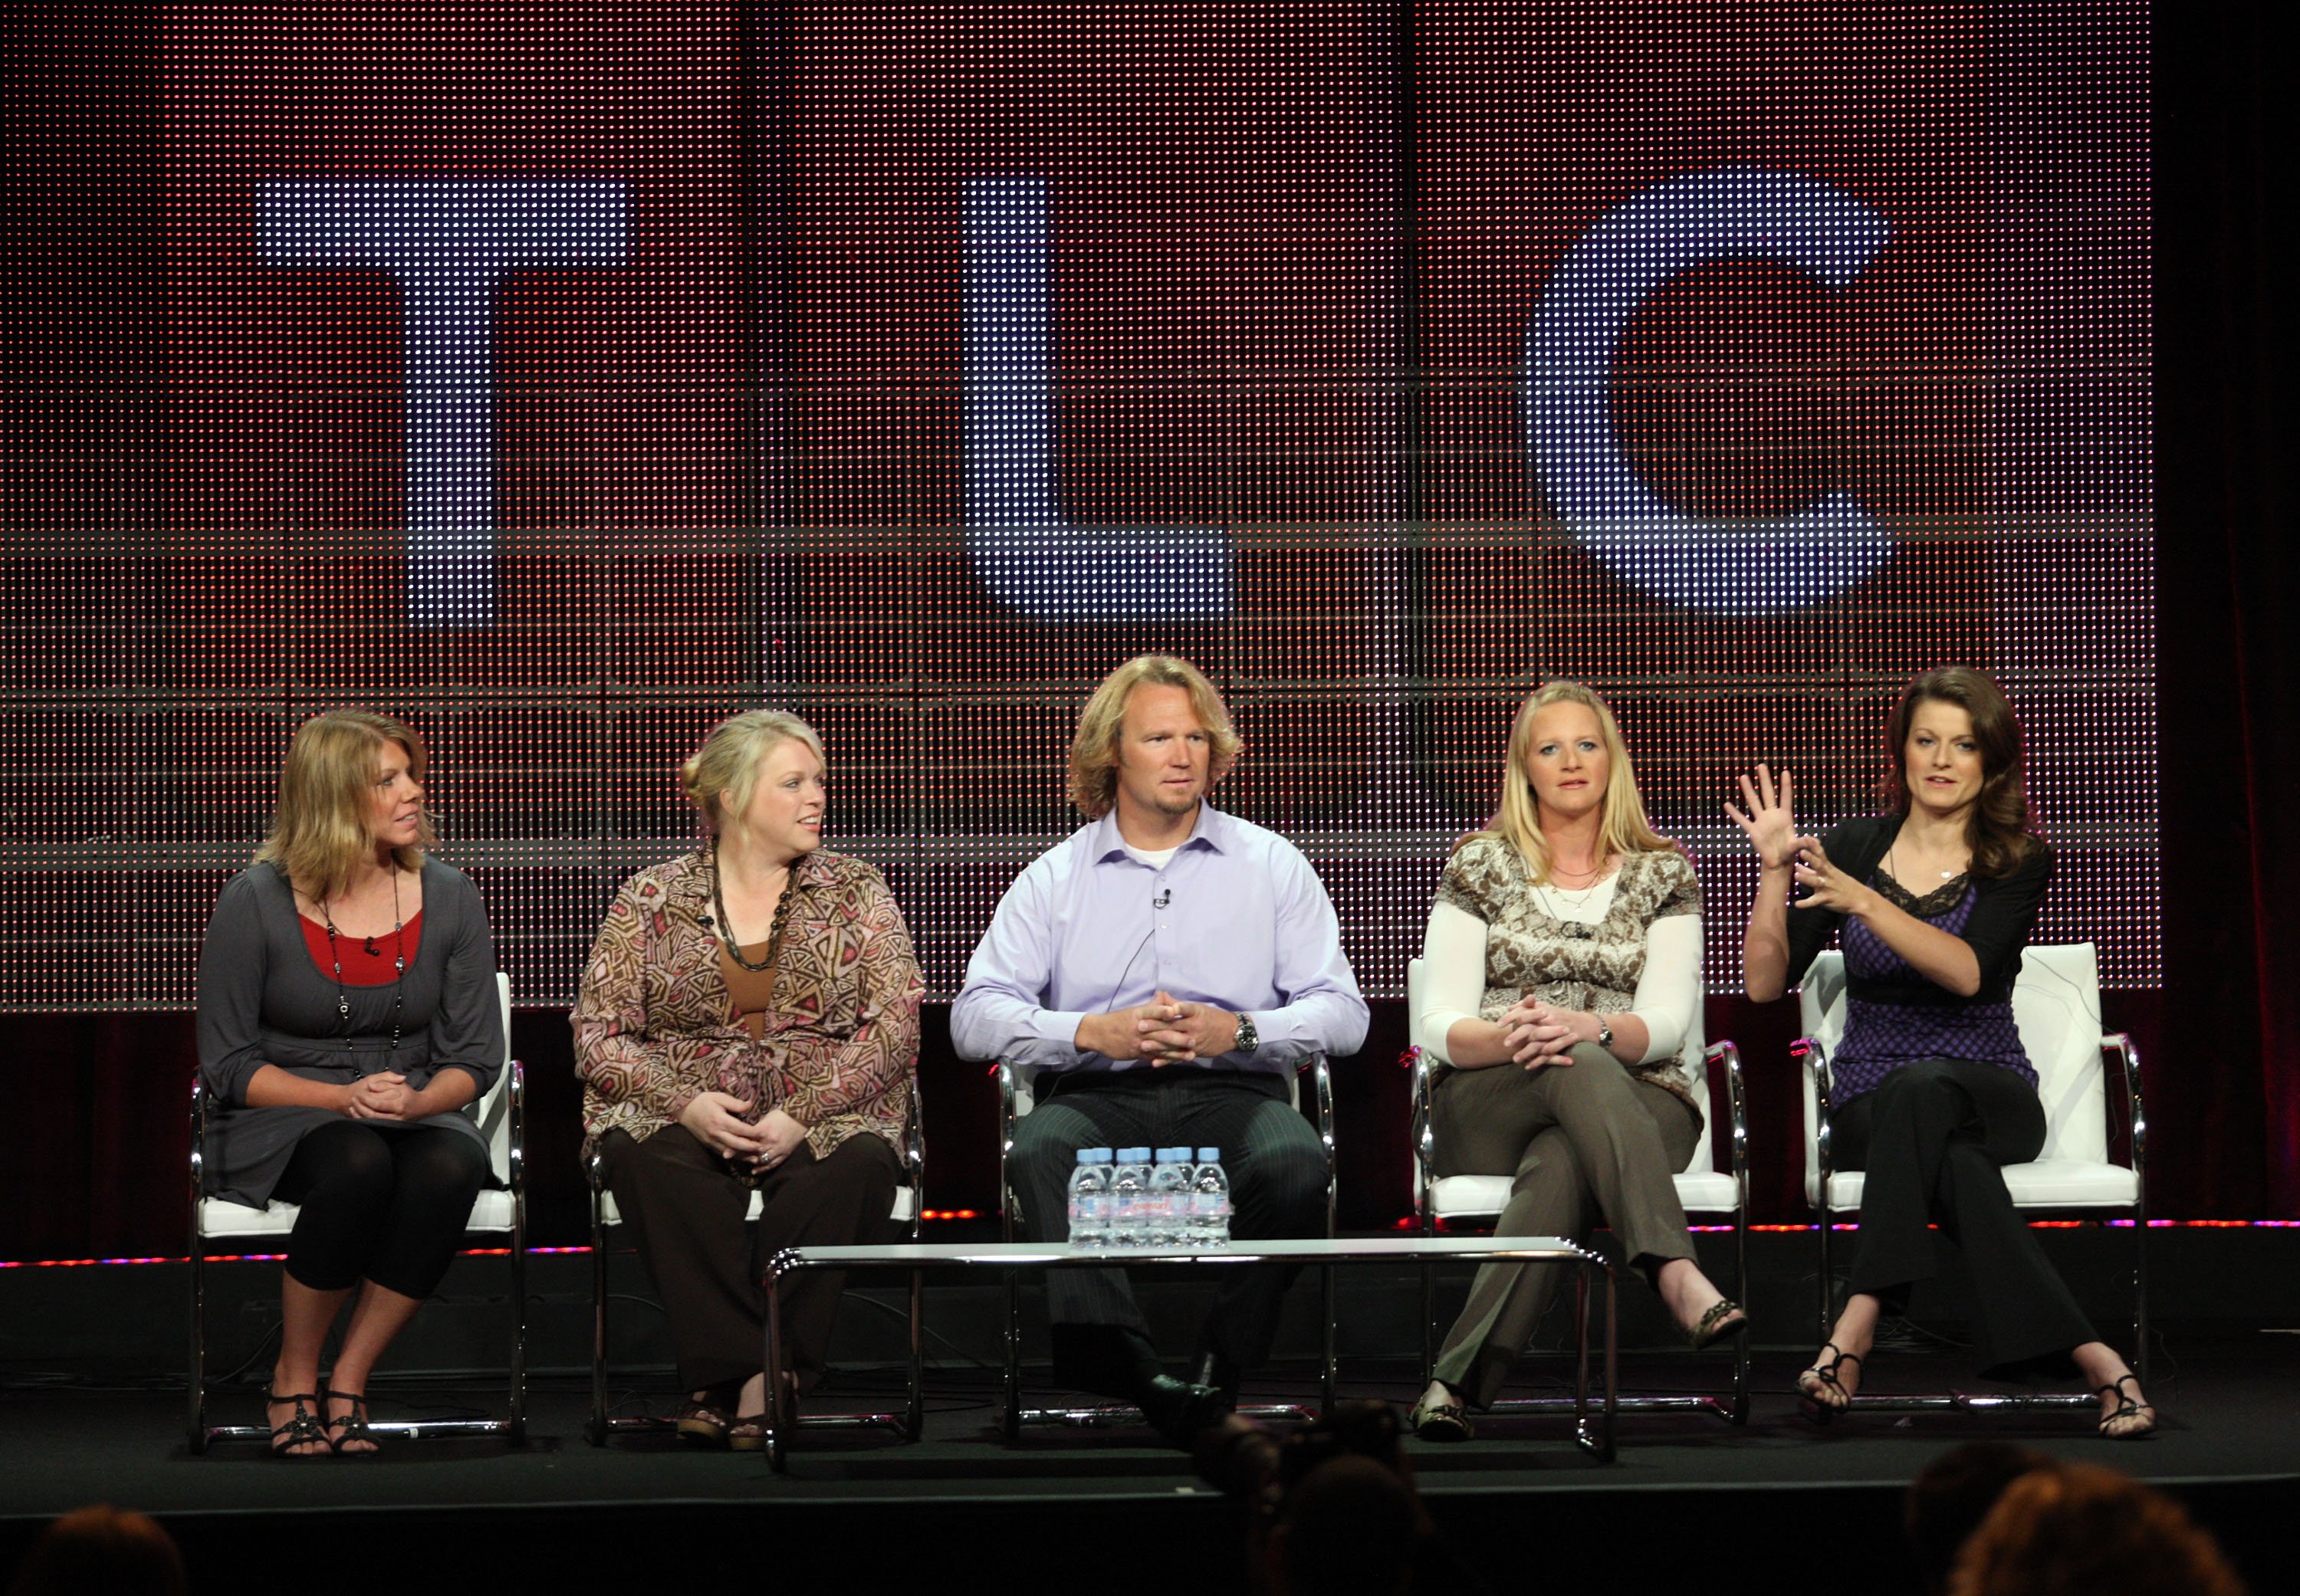 Meri Brown, Janelle Brown, Kody Brown, Christine Brown and Robyn Brown speak at the 'Sister Wives' panel during the 2010 Summer TCA press tour